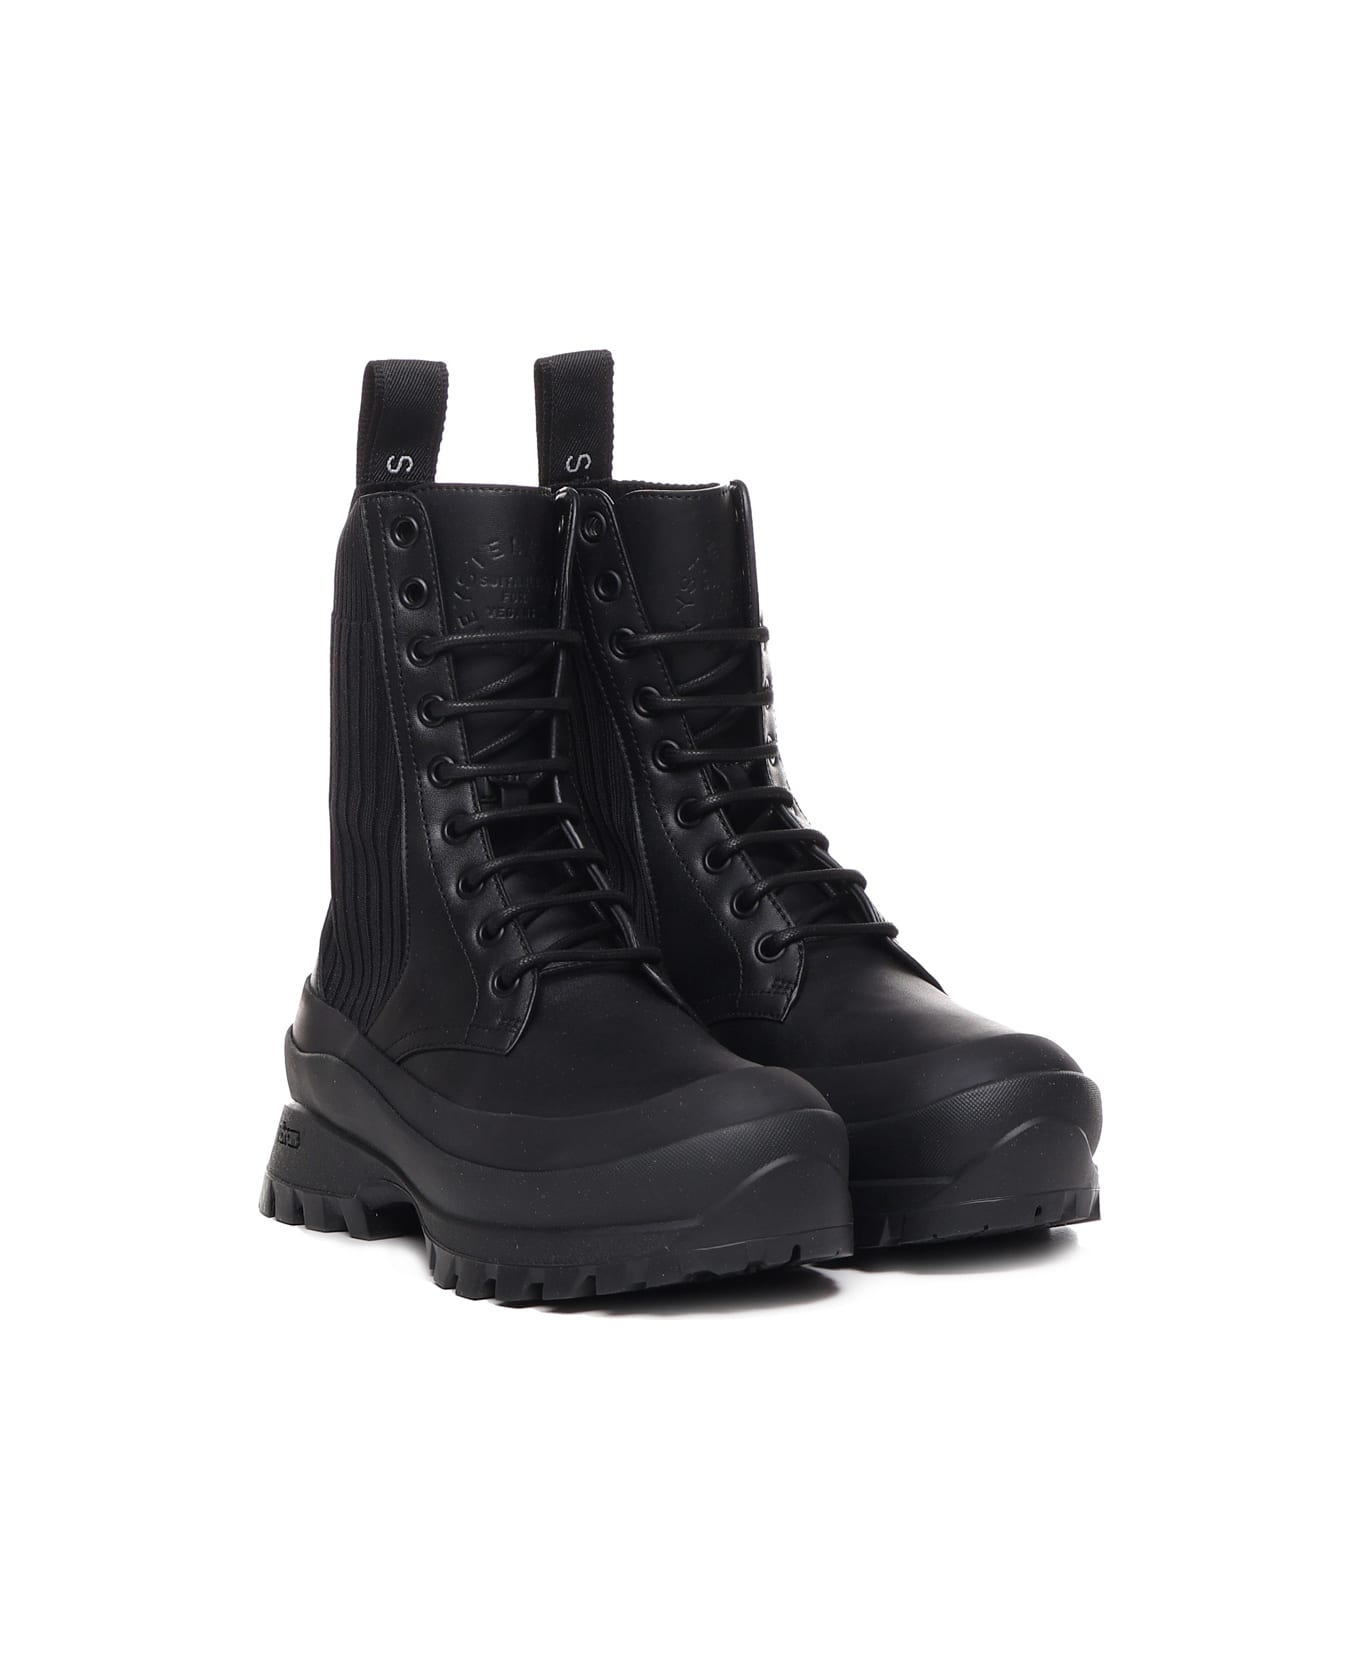 Stella McCartney Biker Boots With Trace Laces - Black